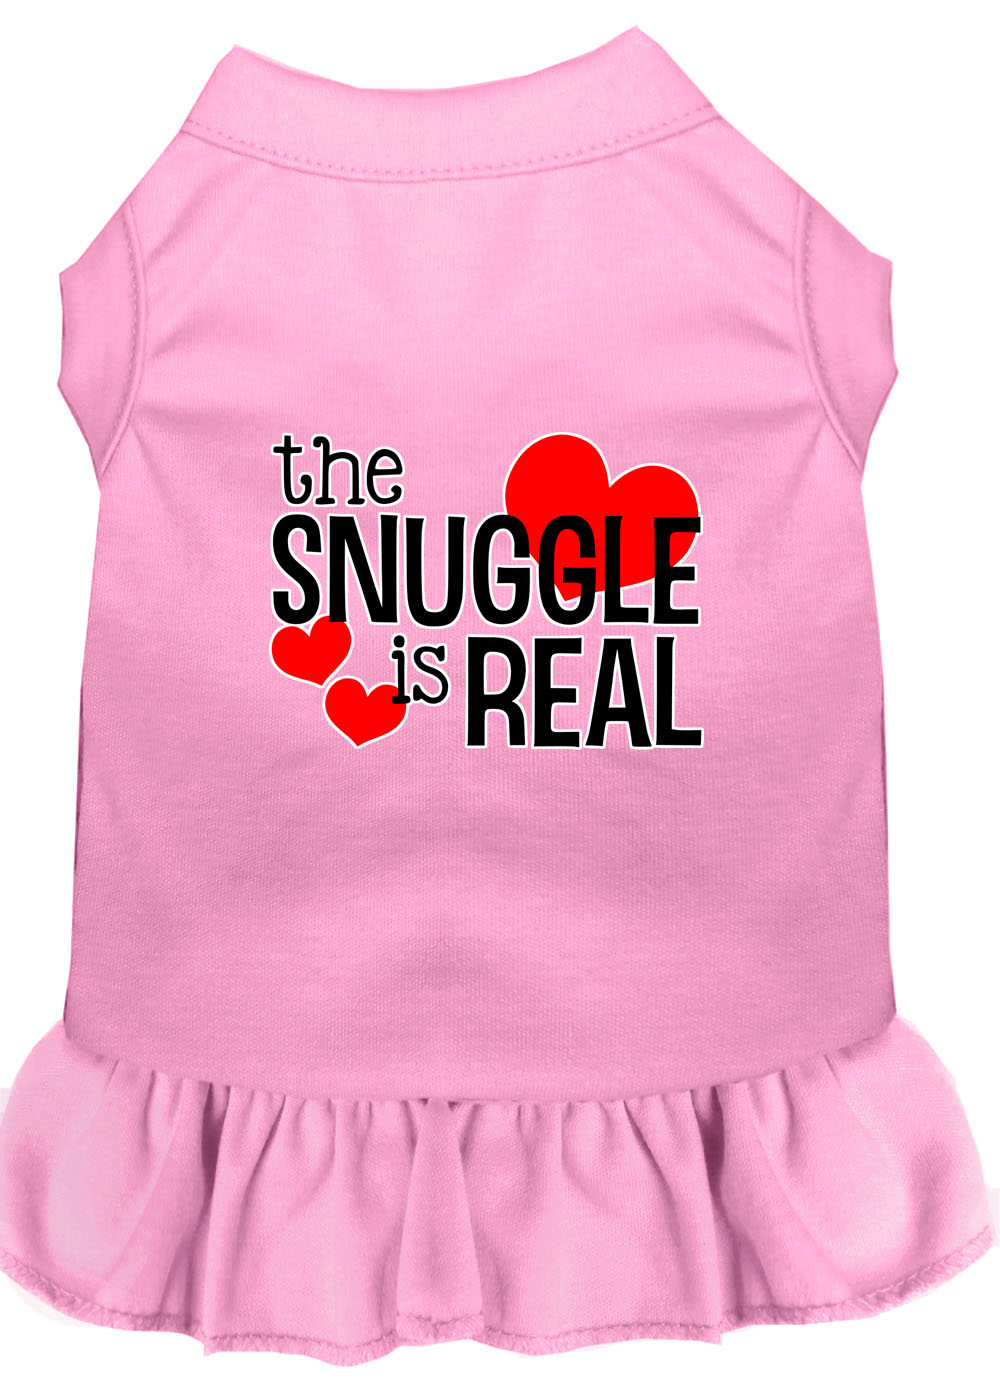 The Snuggle is Real Screen Print Dog Dress Light Pink 4X